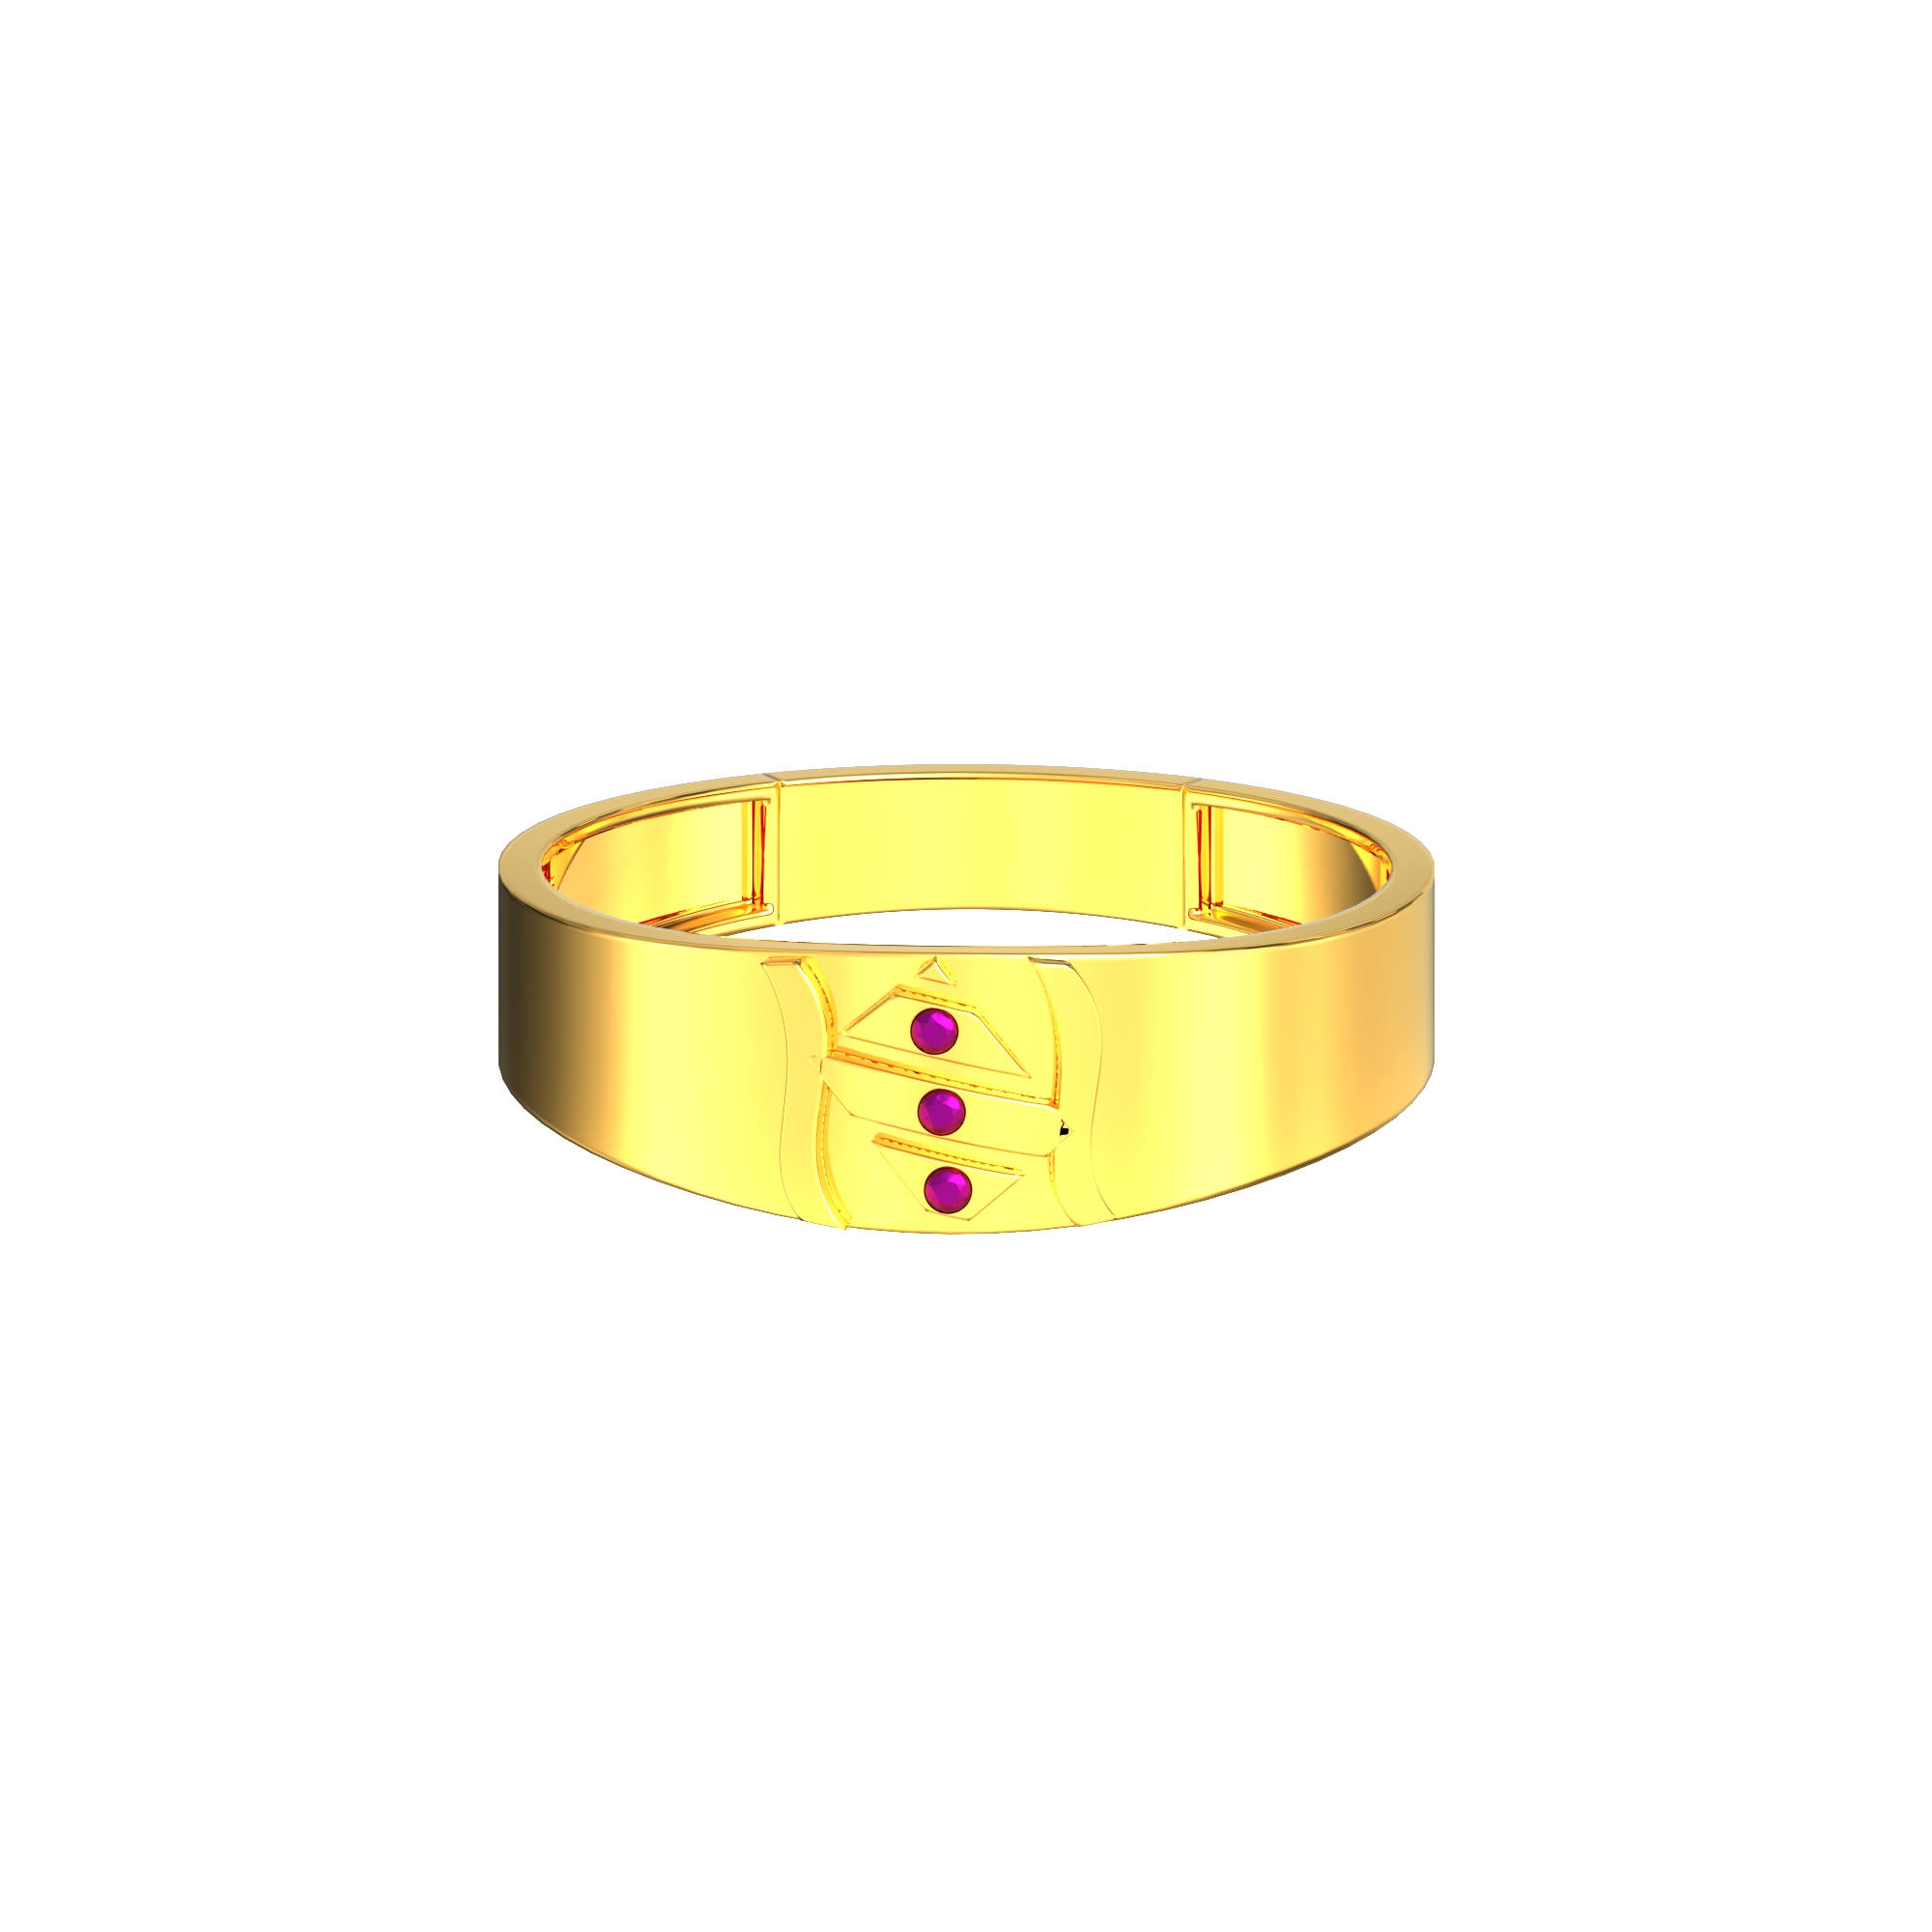 Buy Angelic Sixteen Stone Cubical Design Mens Gold Ring |GRT Jewellers